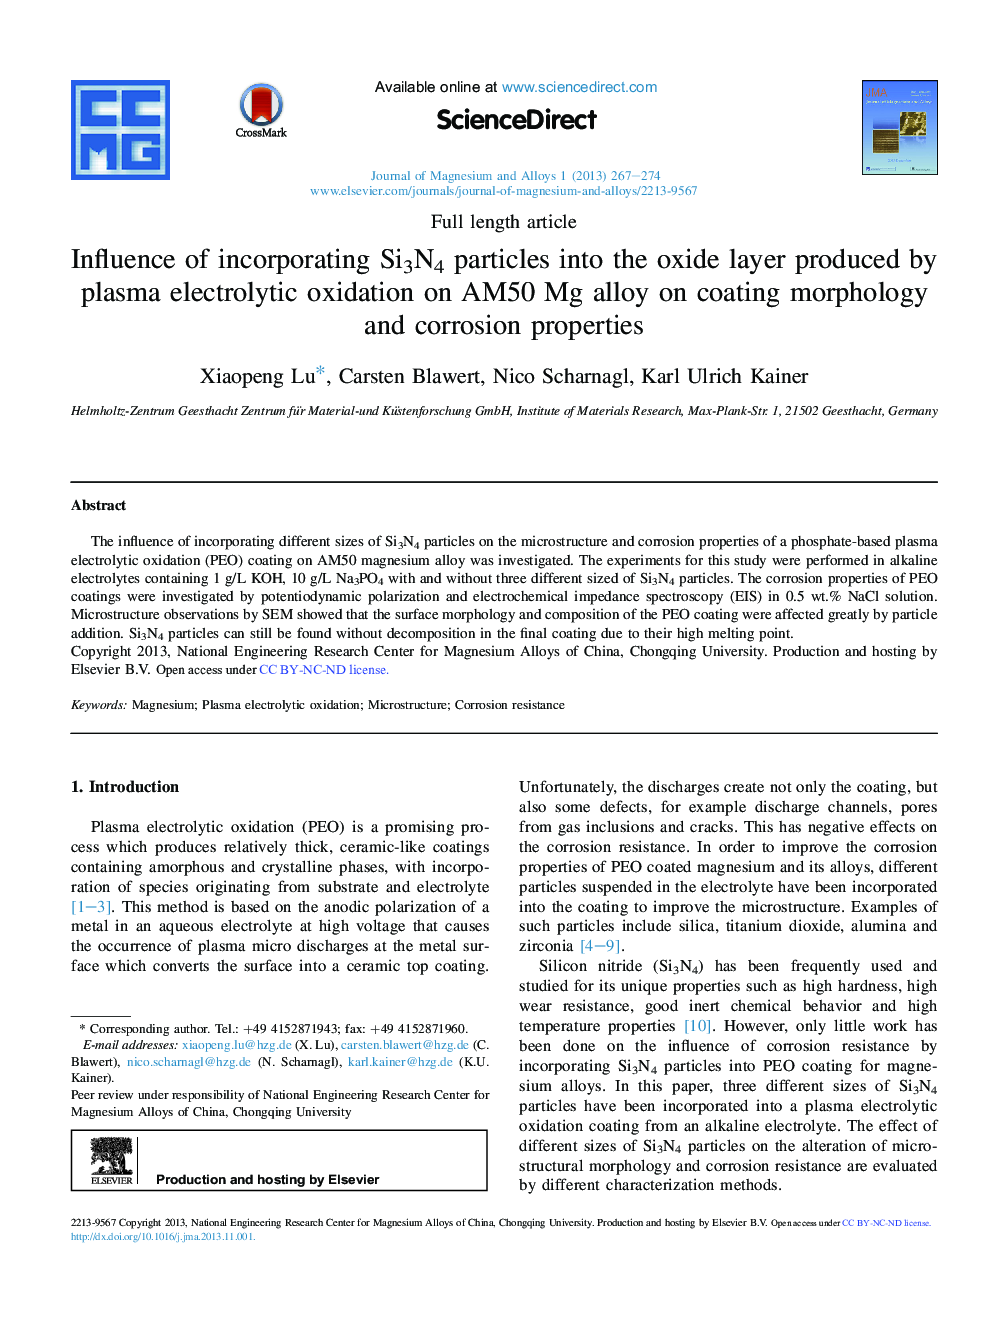 Influence of incorporating Si3N4 particles into the oxide layer produced by plasma electrolytic oxidation on AM50 Mg alloy on coating morphology and corrosion properties 